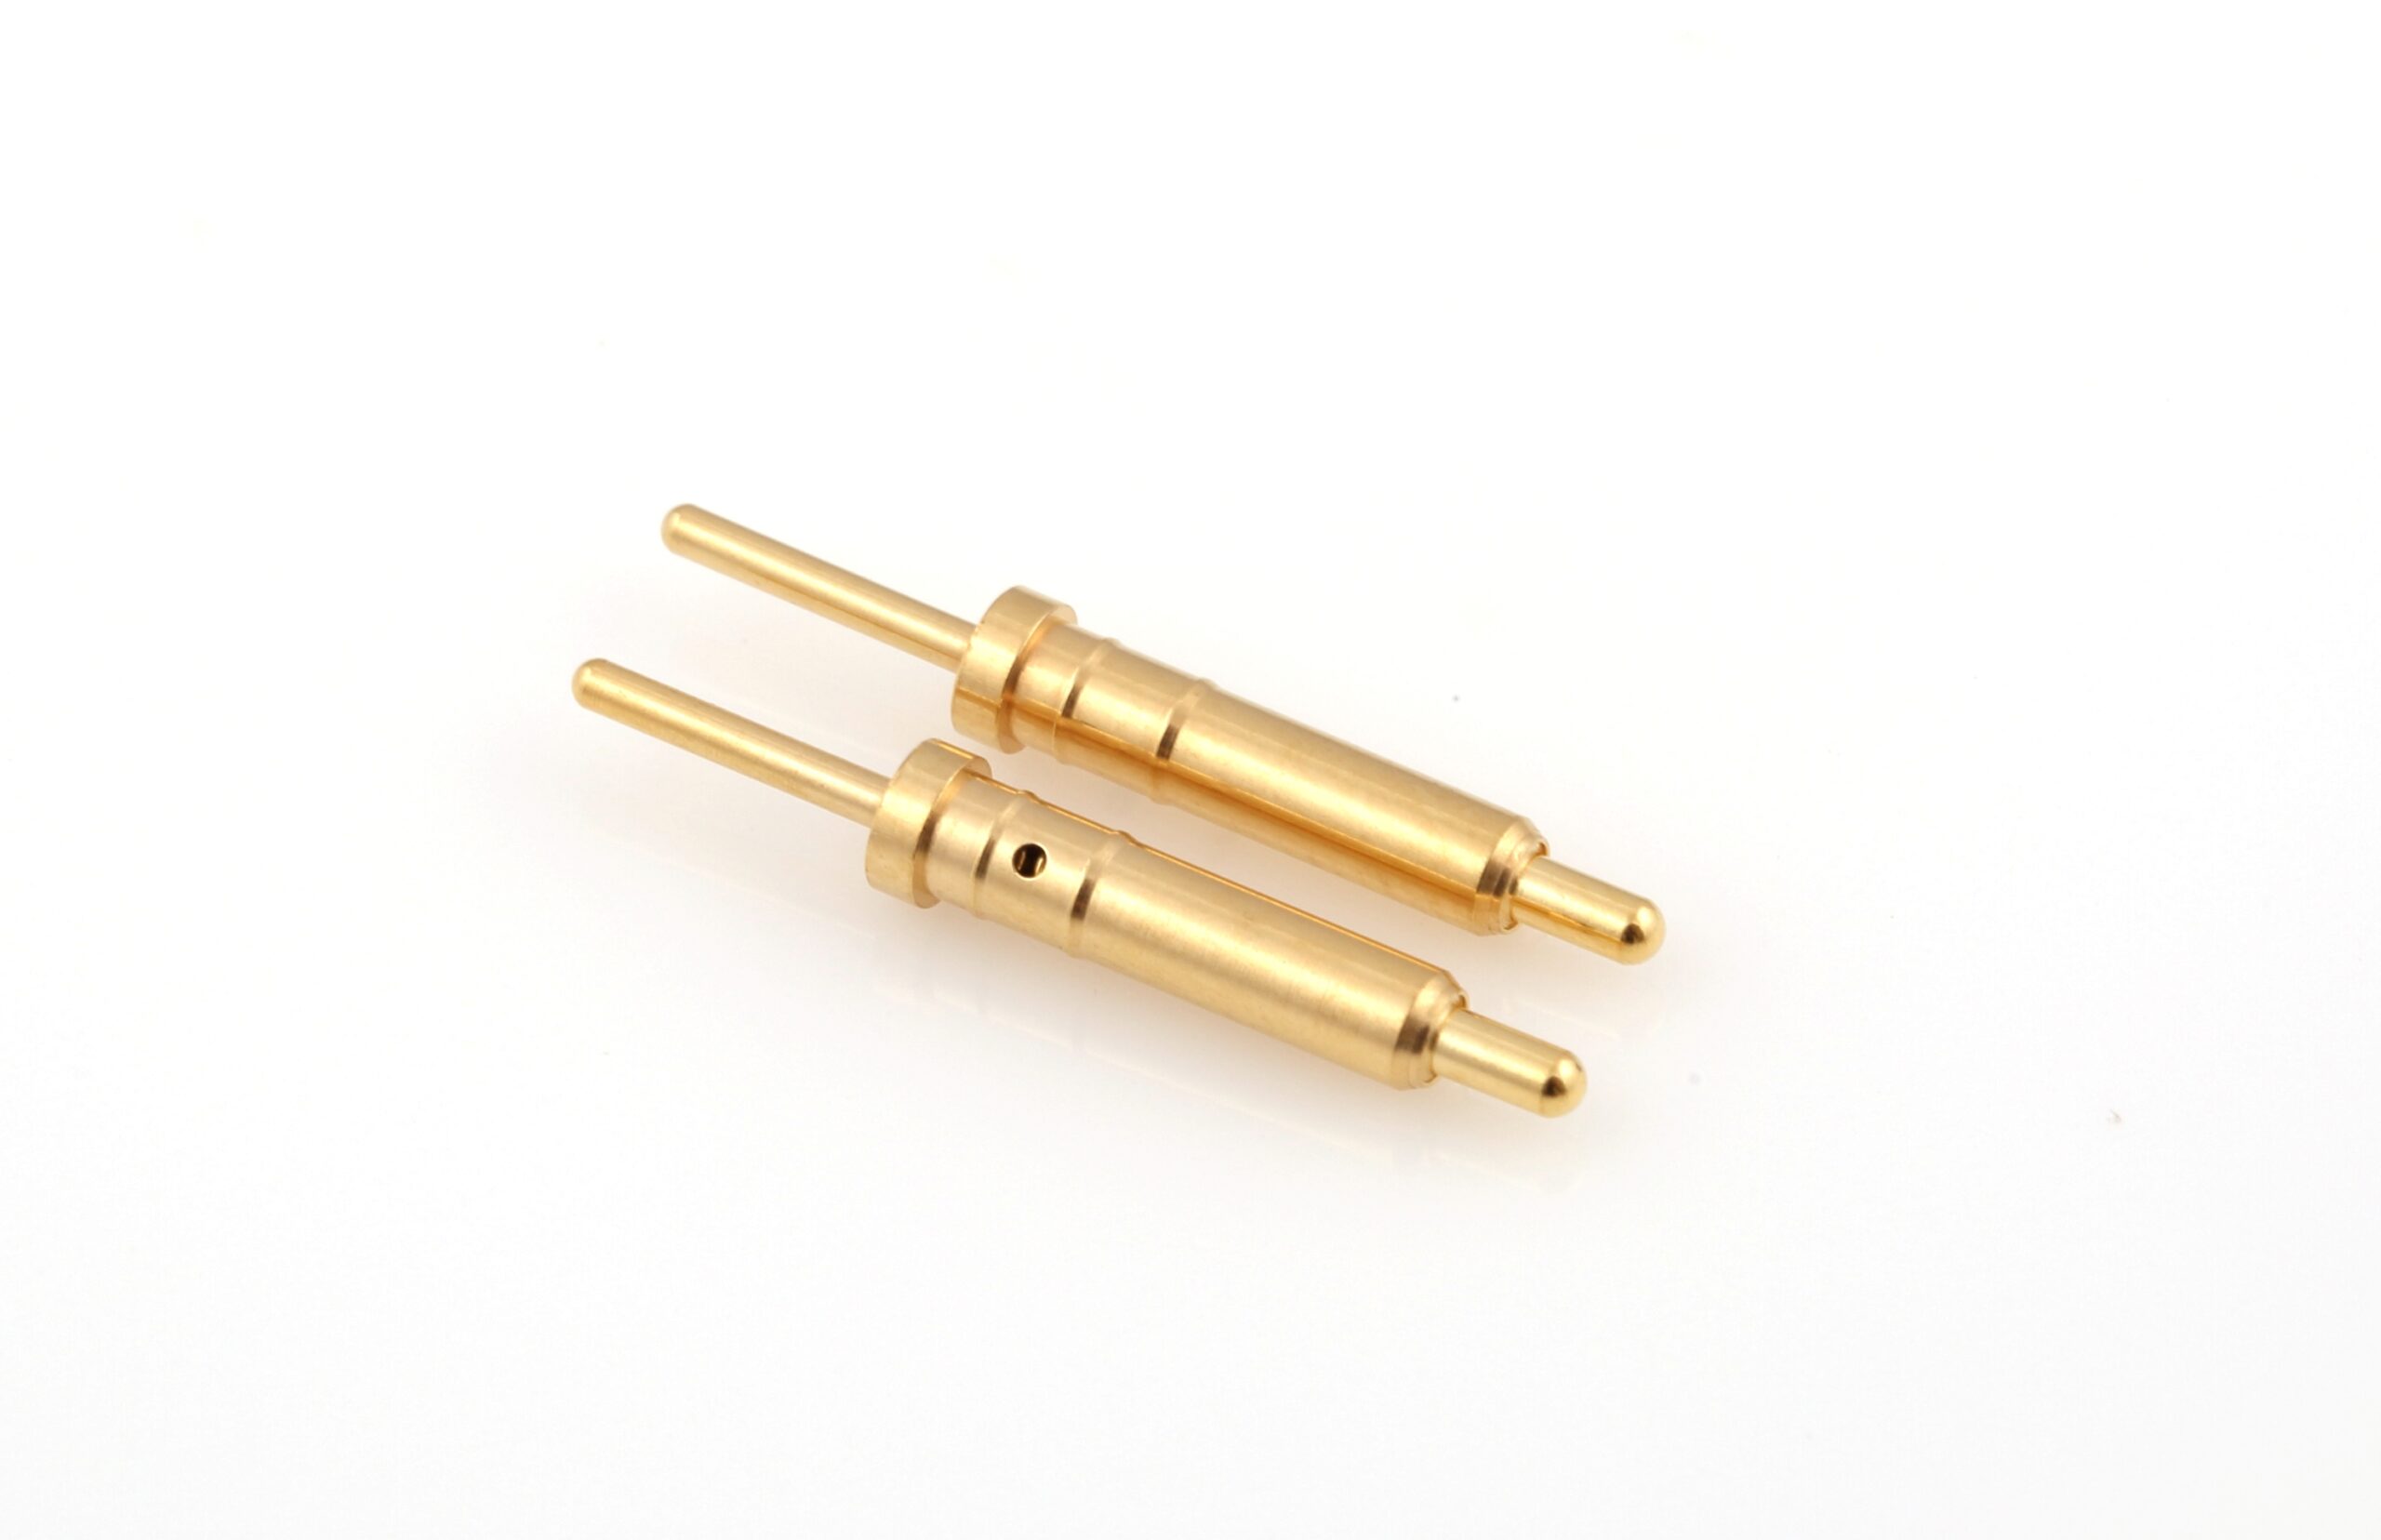 What Are Pogo Pin Connectors Used For?